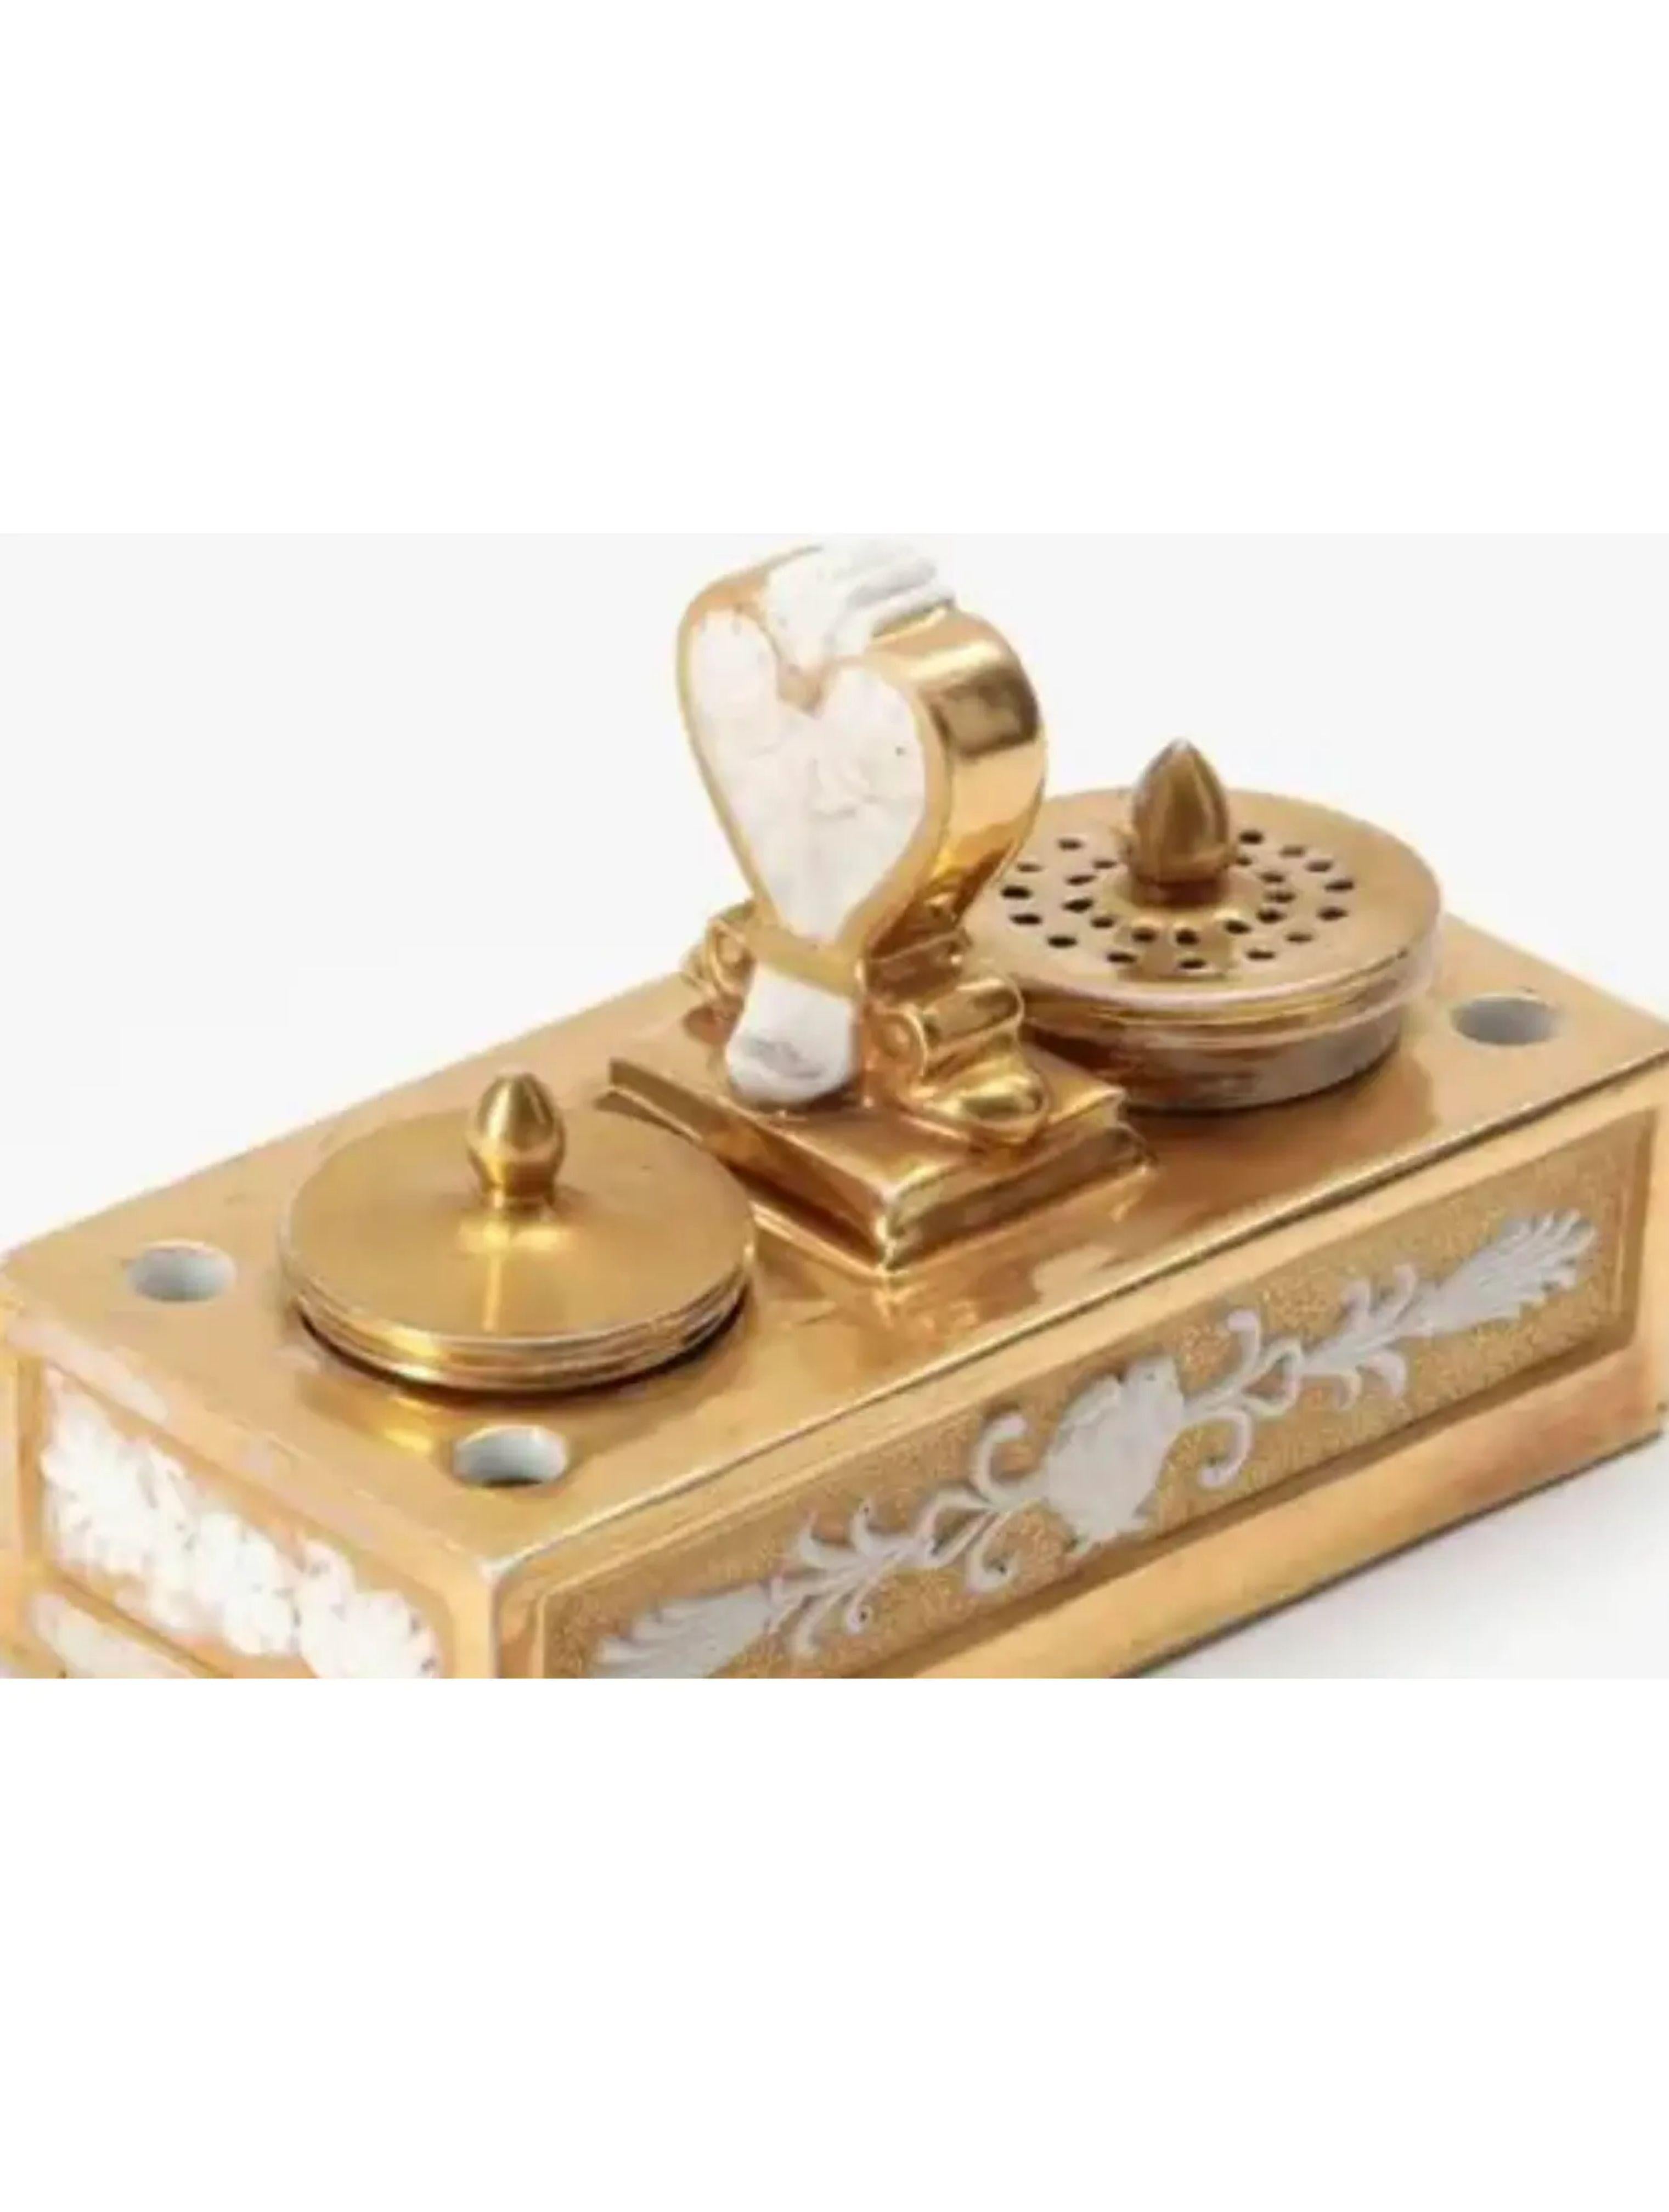 Antique early 19C Old Paris Porcelain Inkwell

Additional information: 
Materials: Porcelain
Color: Gold
Brand: Old Paris
Designer: Old Paris
Period: Early 19th Century
Place of Origin: France
Styles: Louis XVI
Item Type: Vintage, Antique